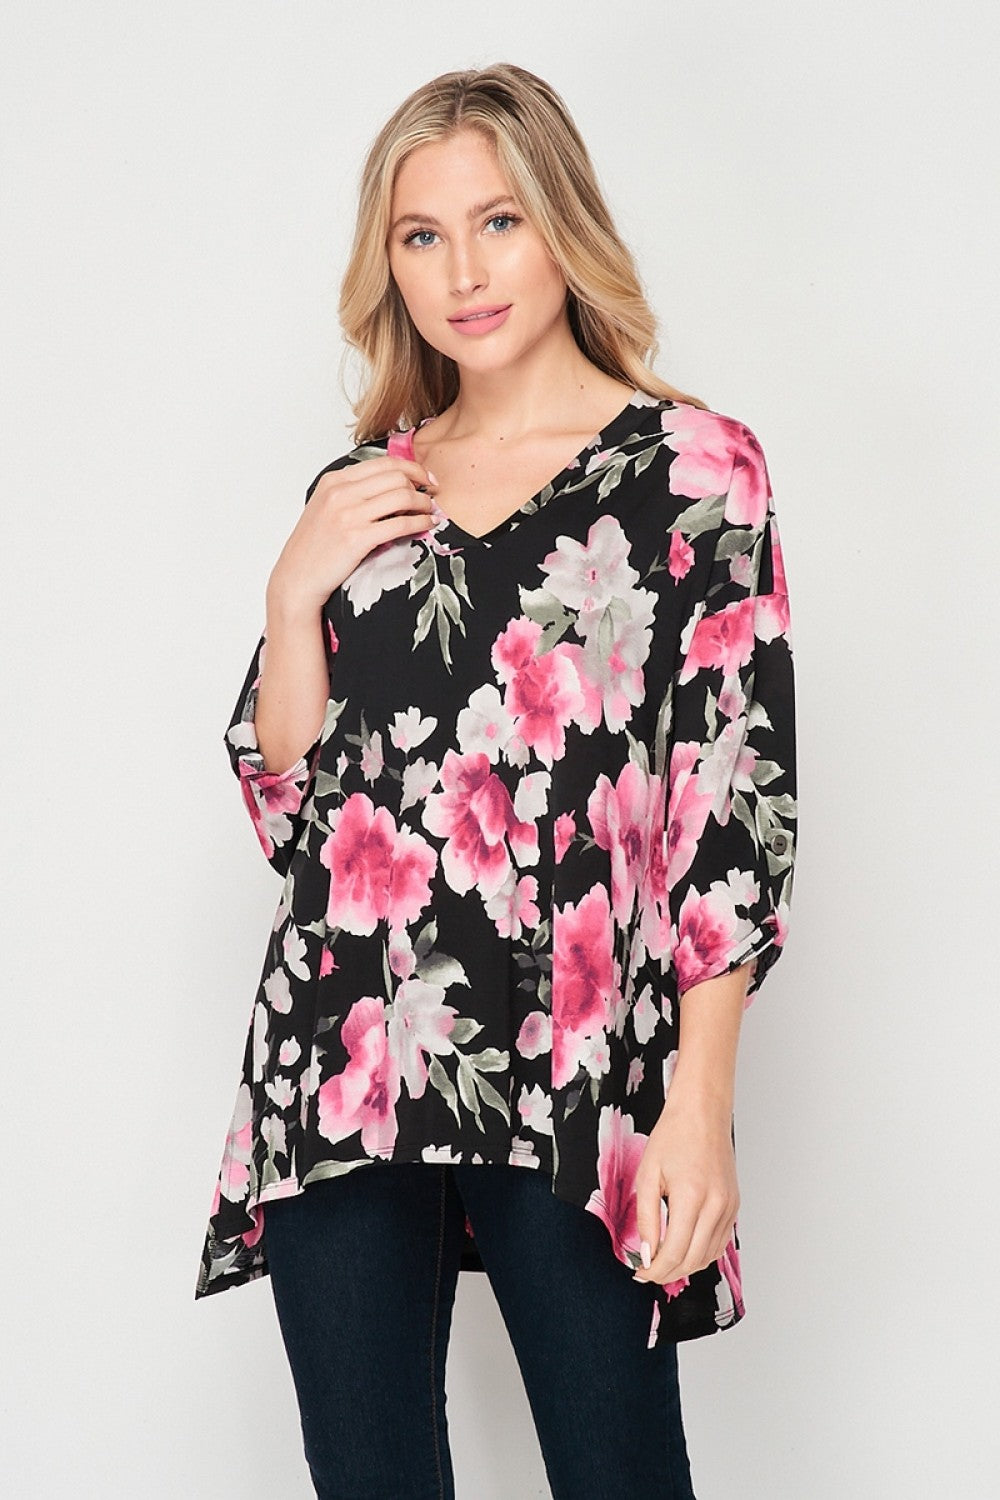 "Going with the Flow" Oversized Floral 3/4 Sleeve-Lola Monroe Boutique